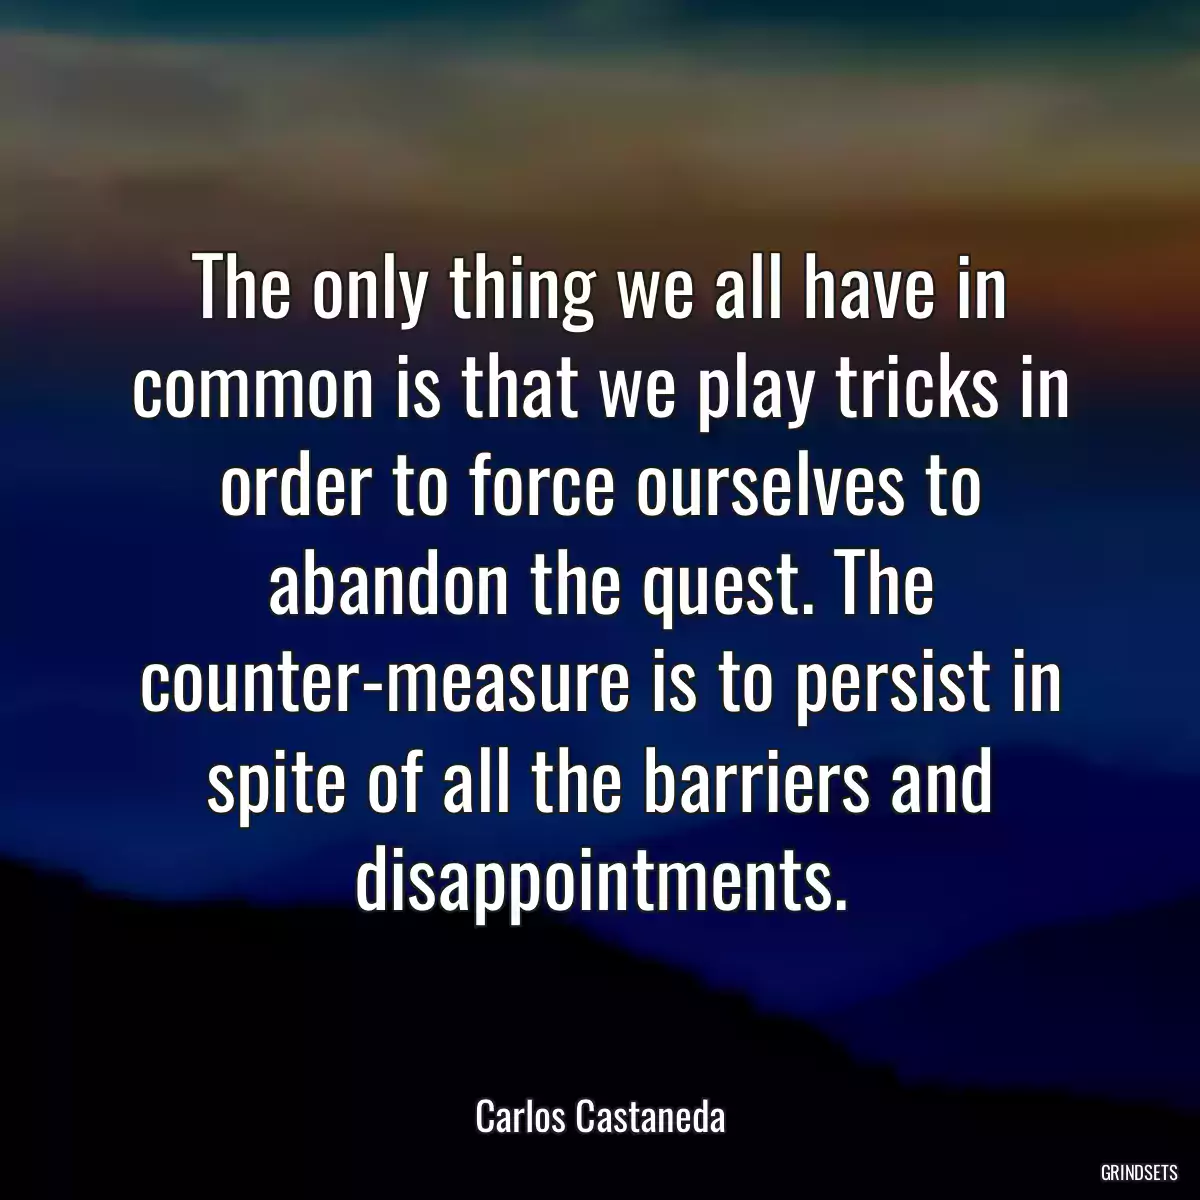 The only thing we all have in common is that we play tricks in order to force ourselves to abandon the quest. The counter-measure is to persist in spite of all the barriers and disappointments.